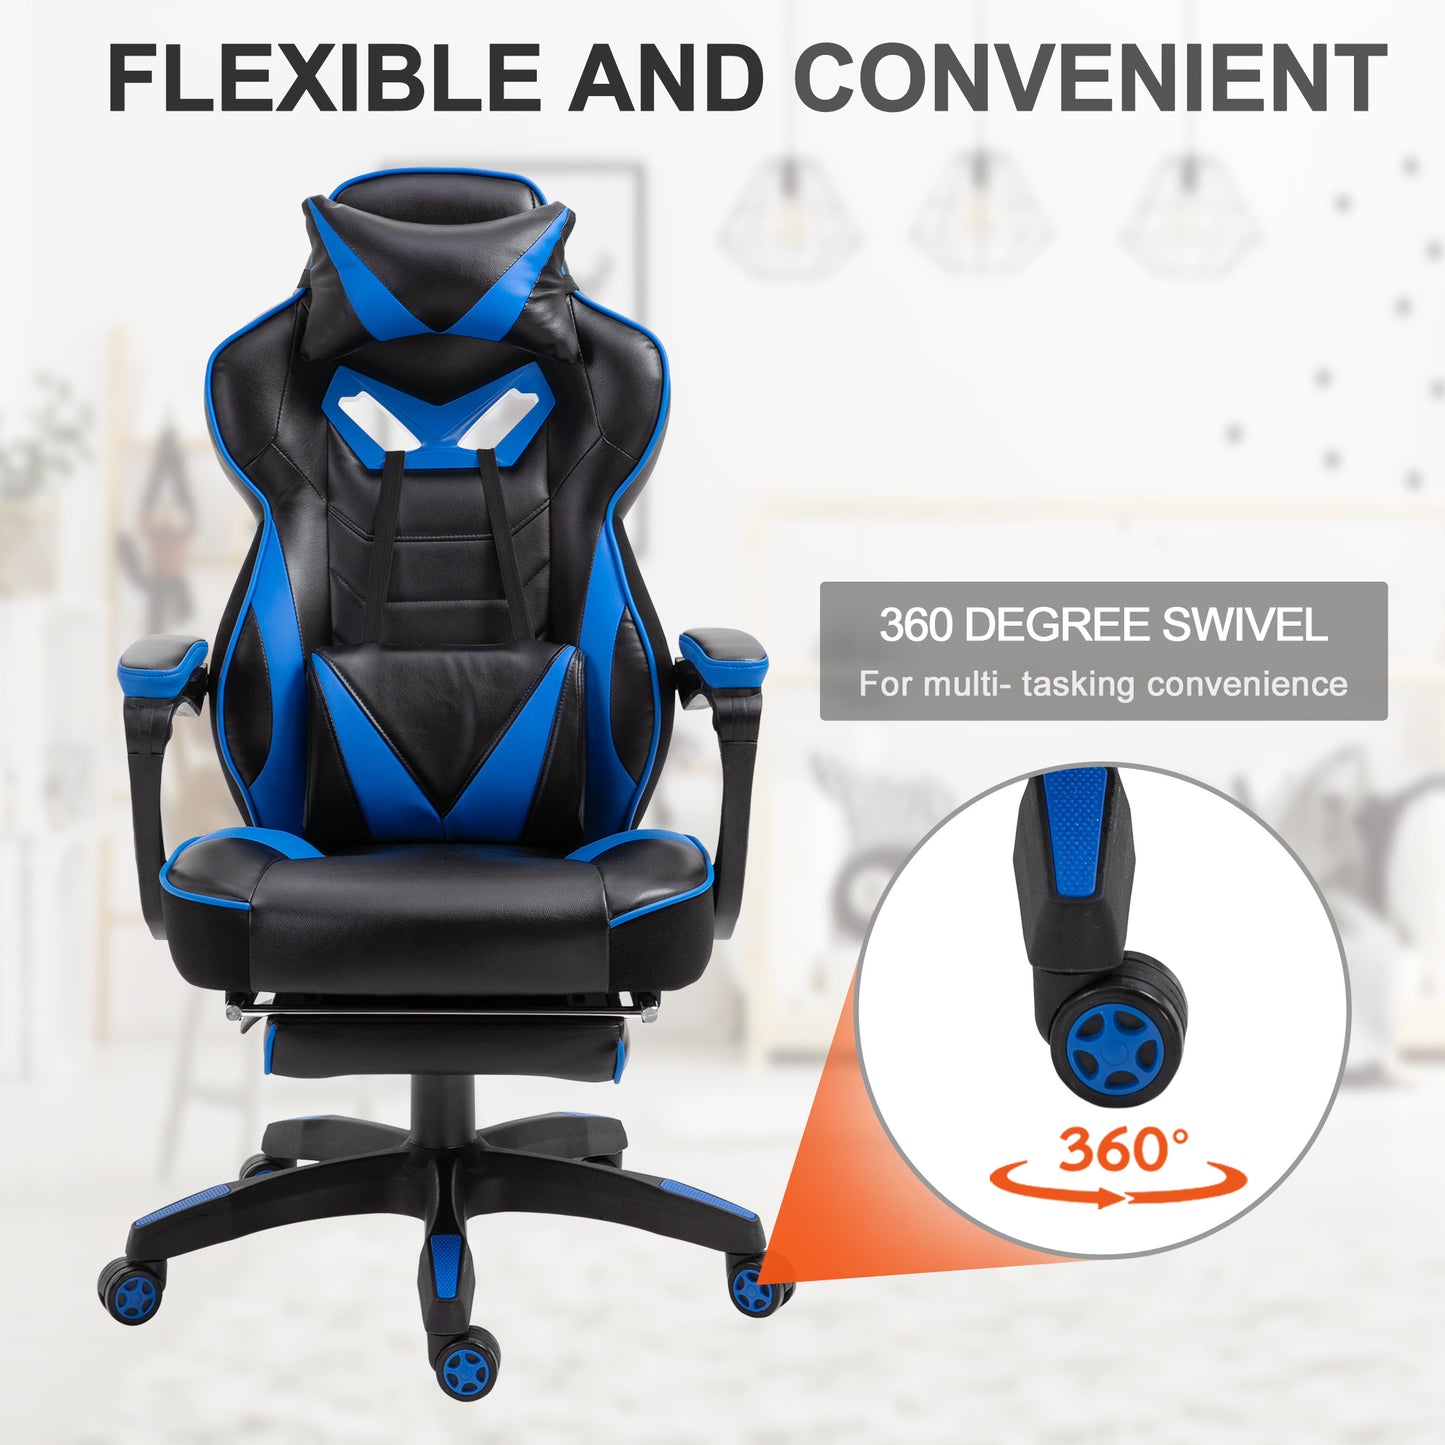 Vinsetto PU Leather Retractable Footrest Gaming Chair w/ Pillows Blue/Black